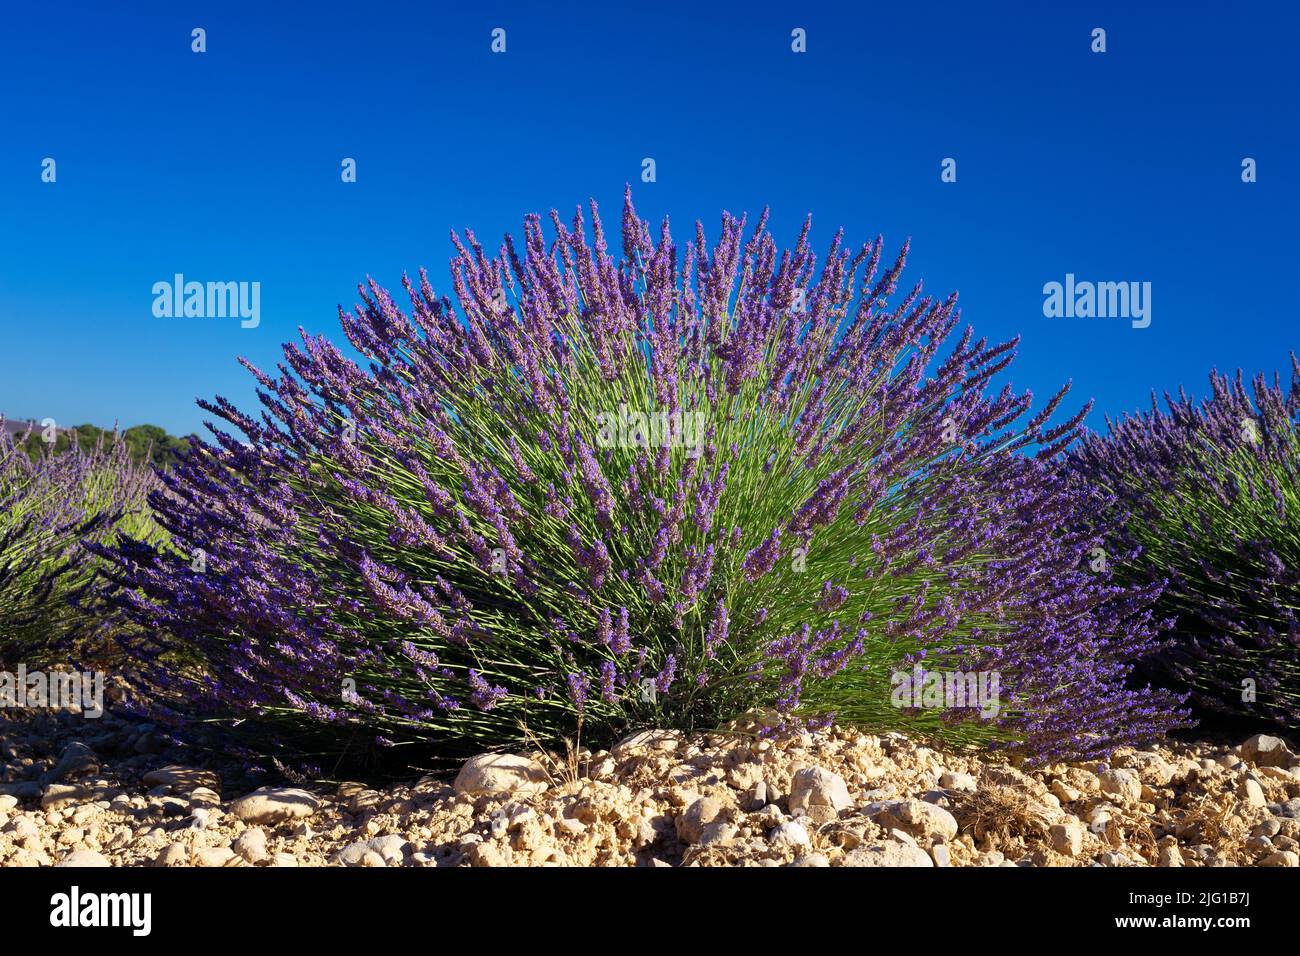 View of flowers in lavender field, Valensole, France Stock Photo